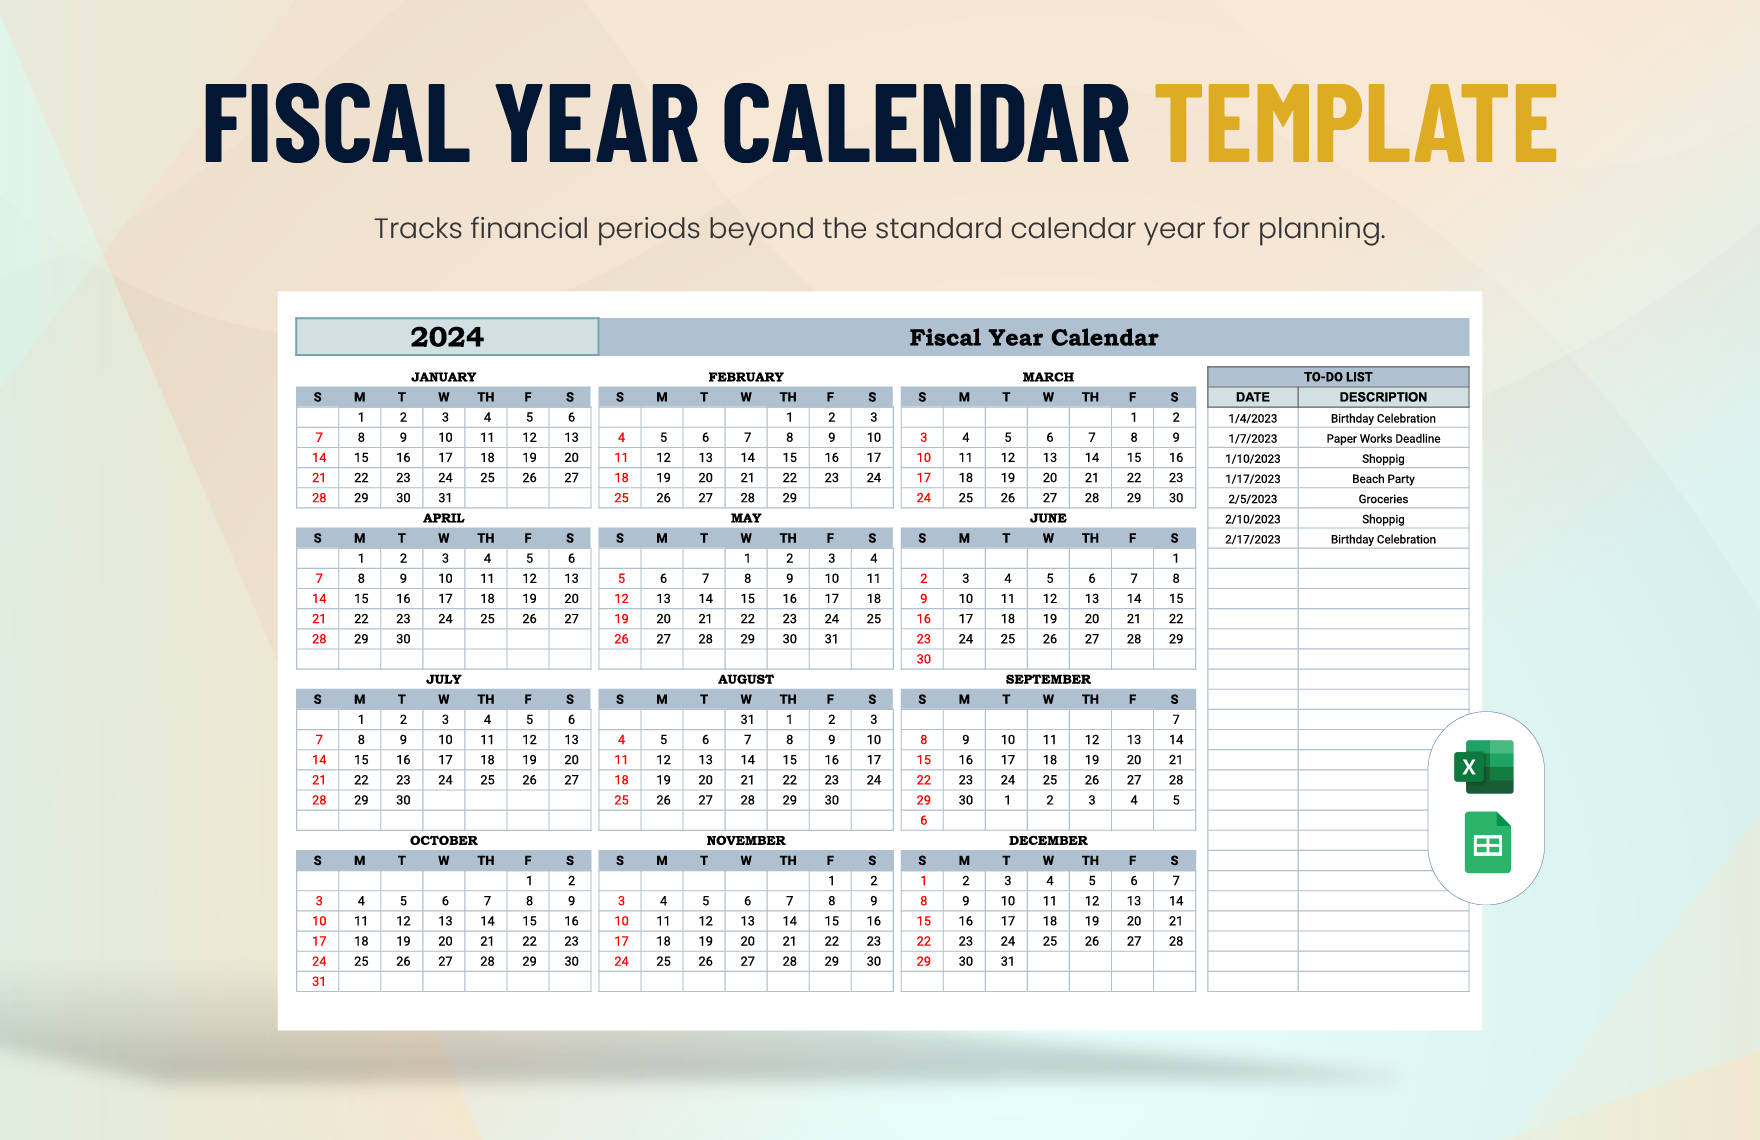 Fiscal Year Calendar Template in Excel, Google Sheets